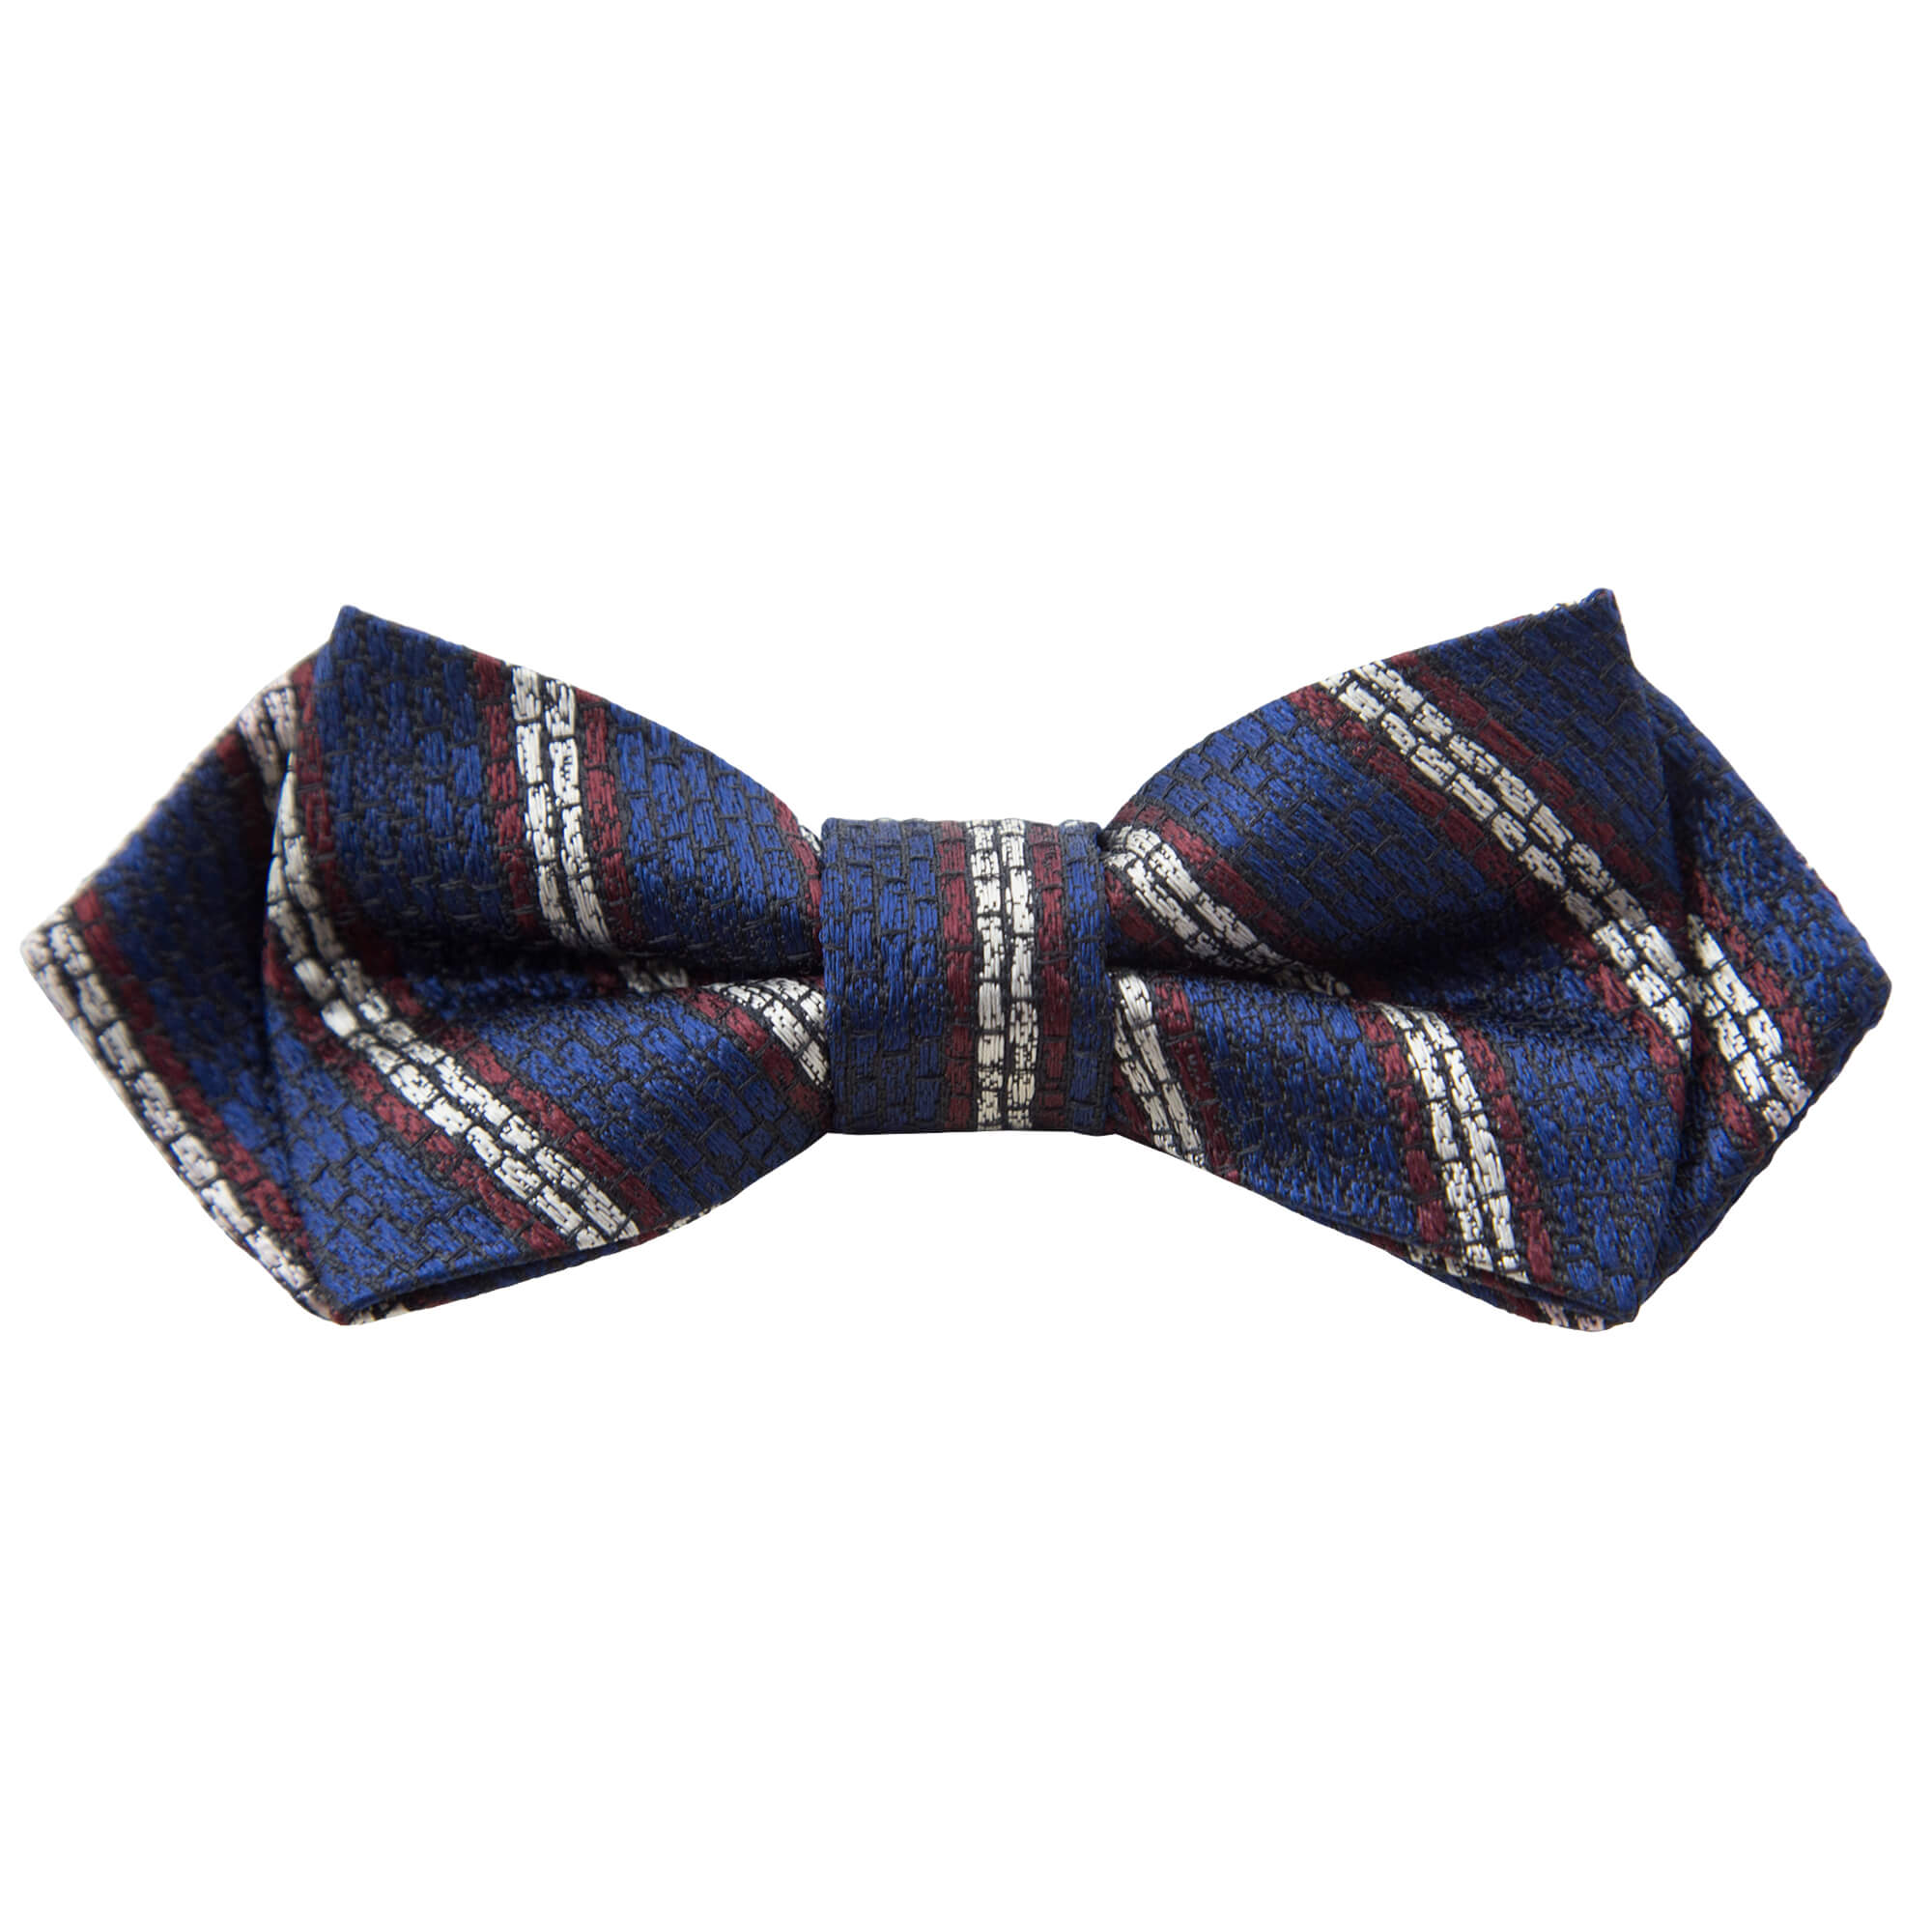 BLUE WITH RED AND BEIGE STRIPES BOW TIE